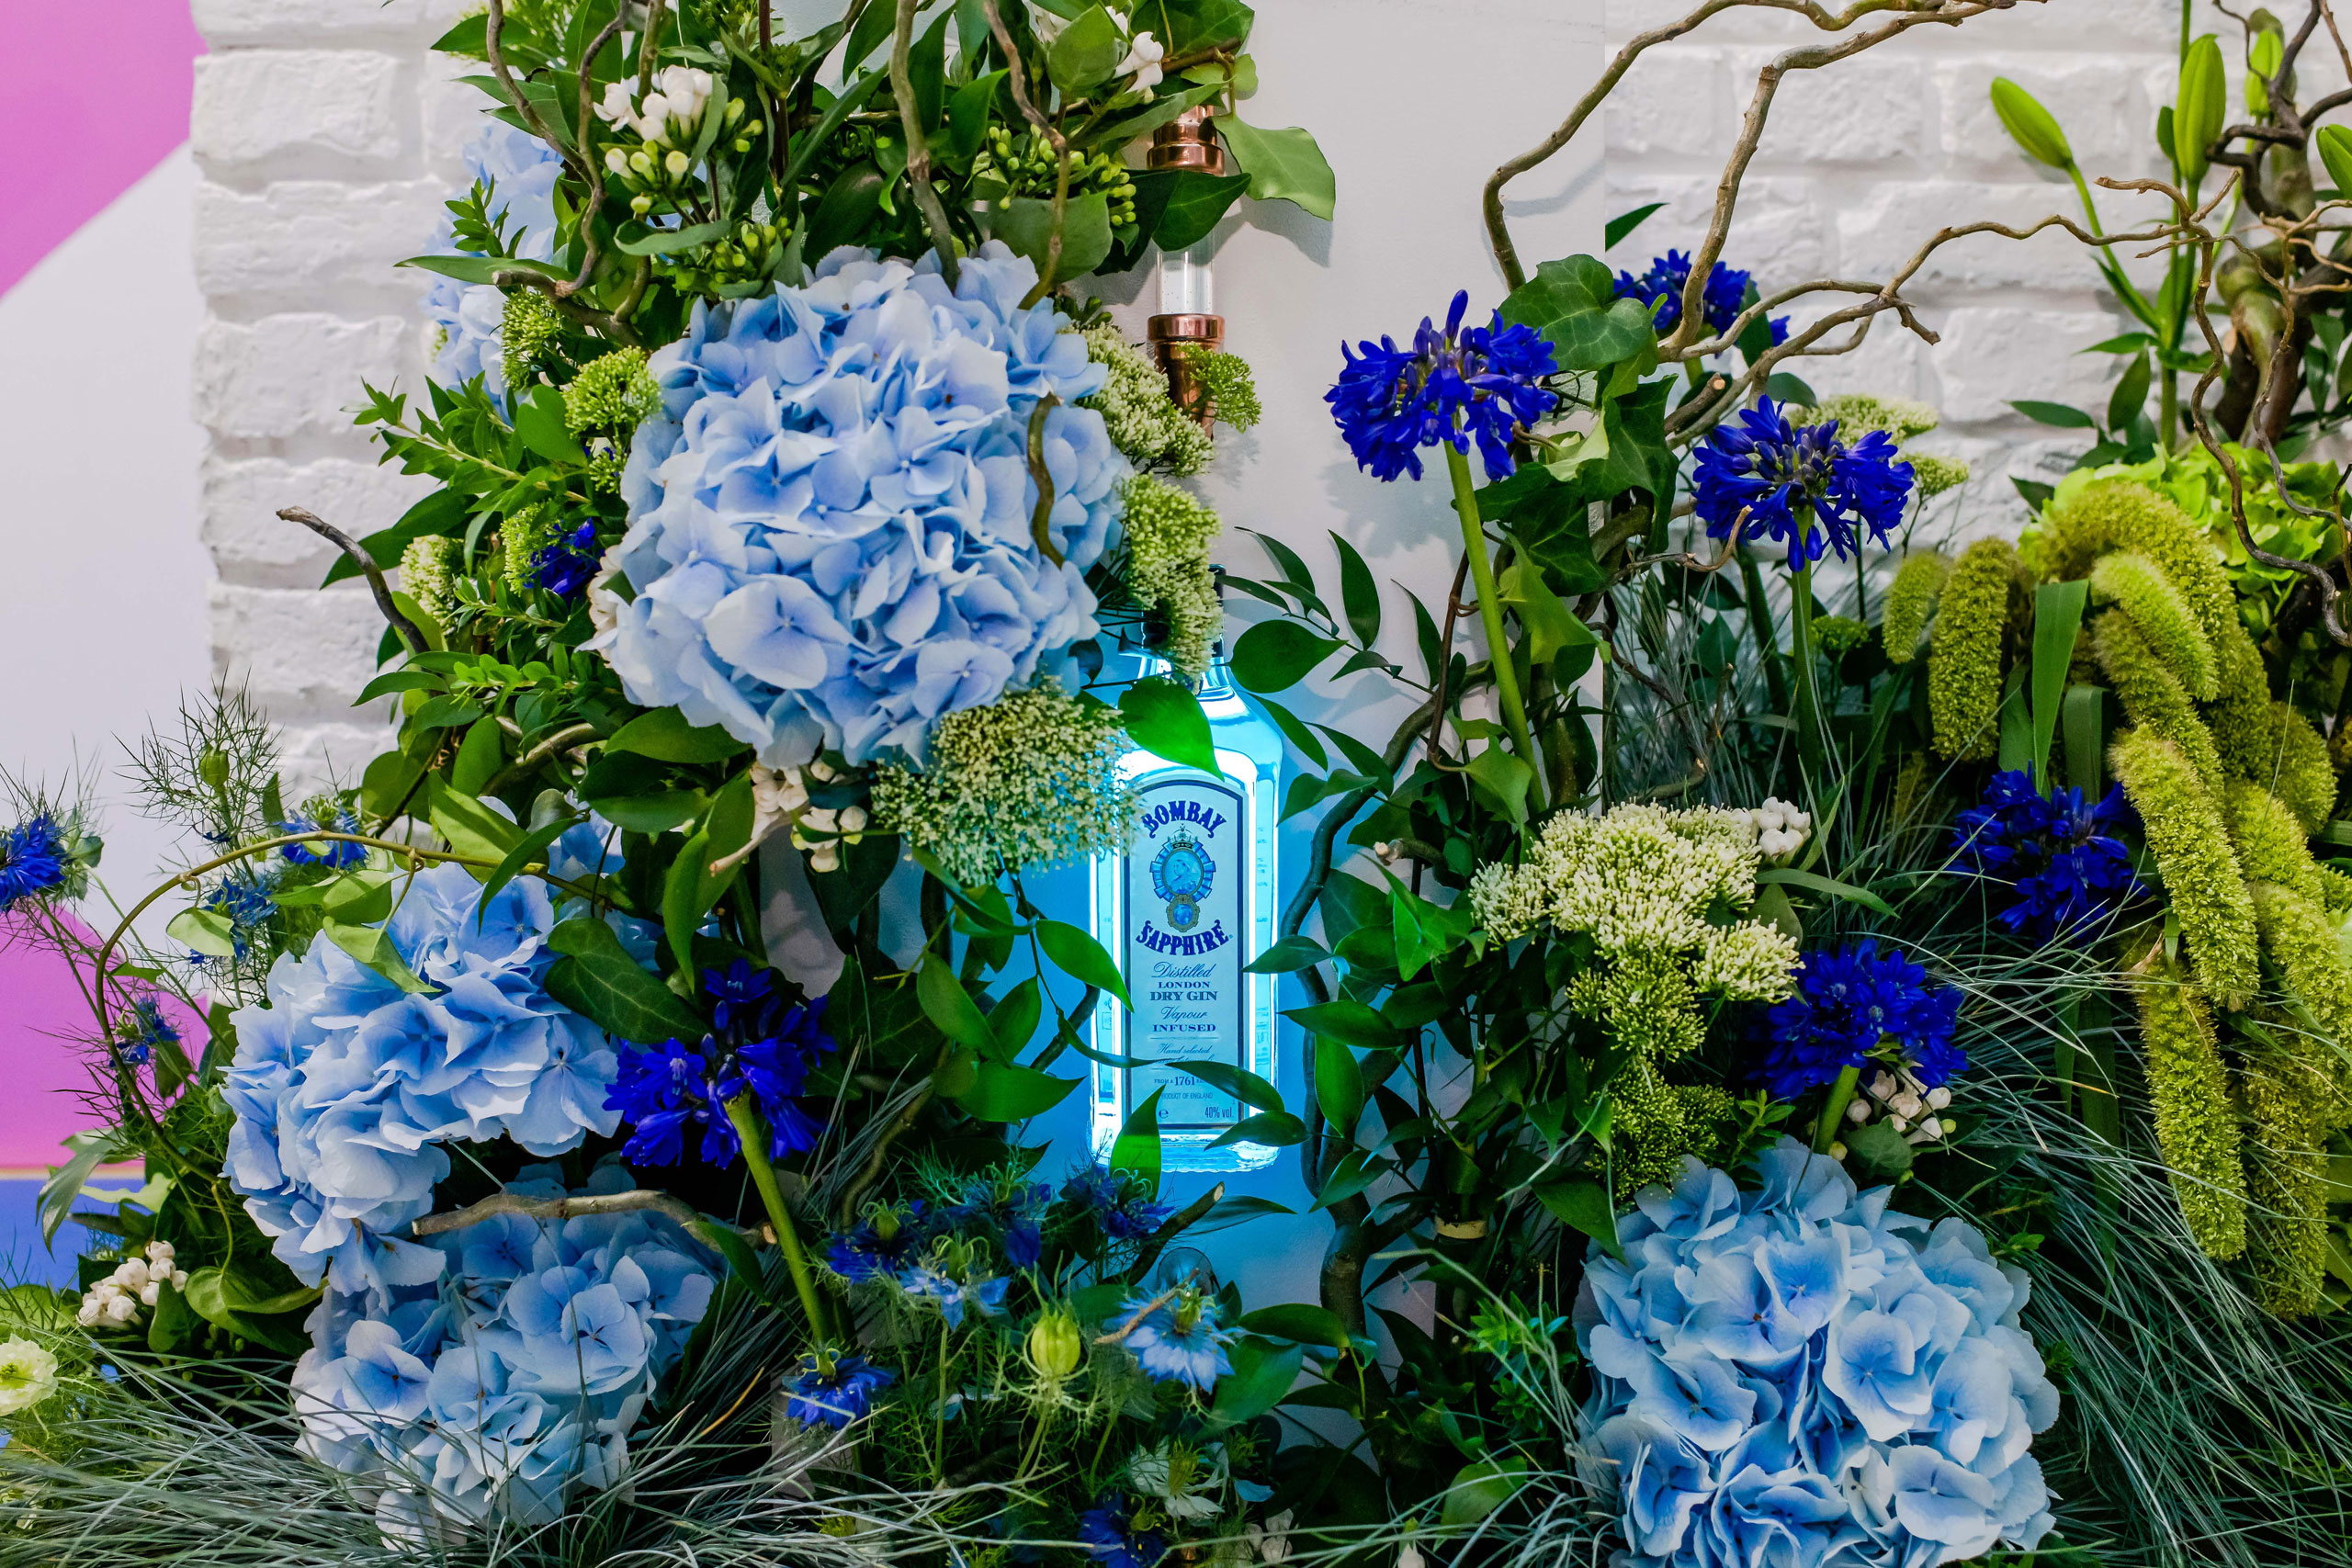 CANVAS event by Bombay Sapphire, London, July 2018. Installattion view by Elias Joidos © Yatzerland Ltd.